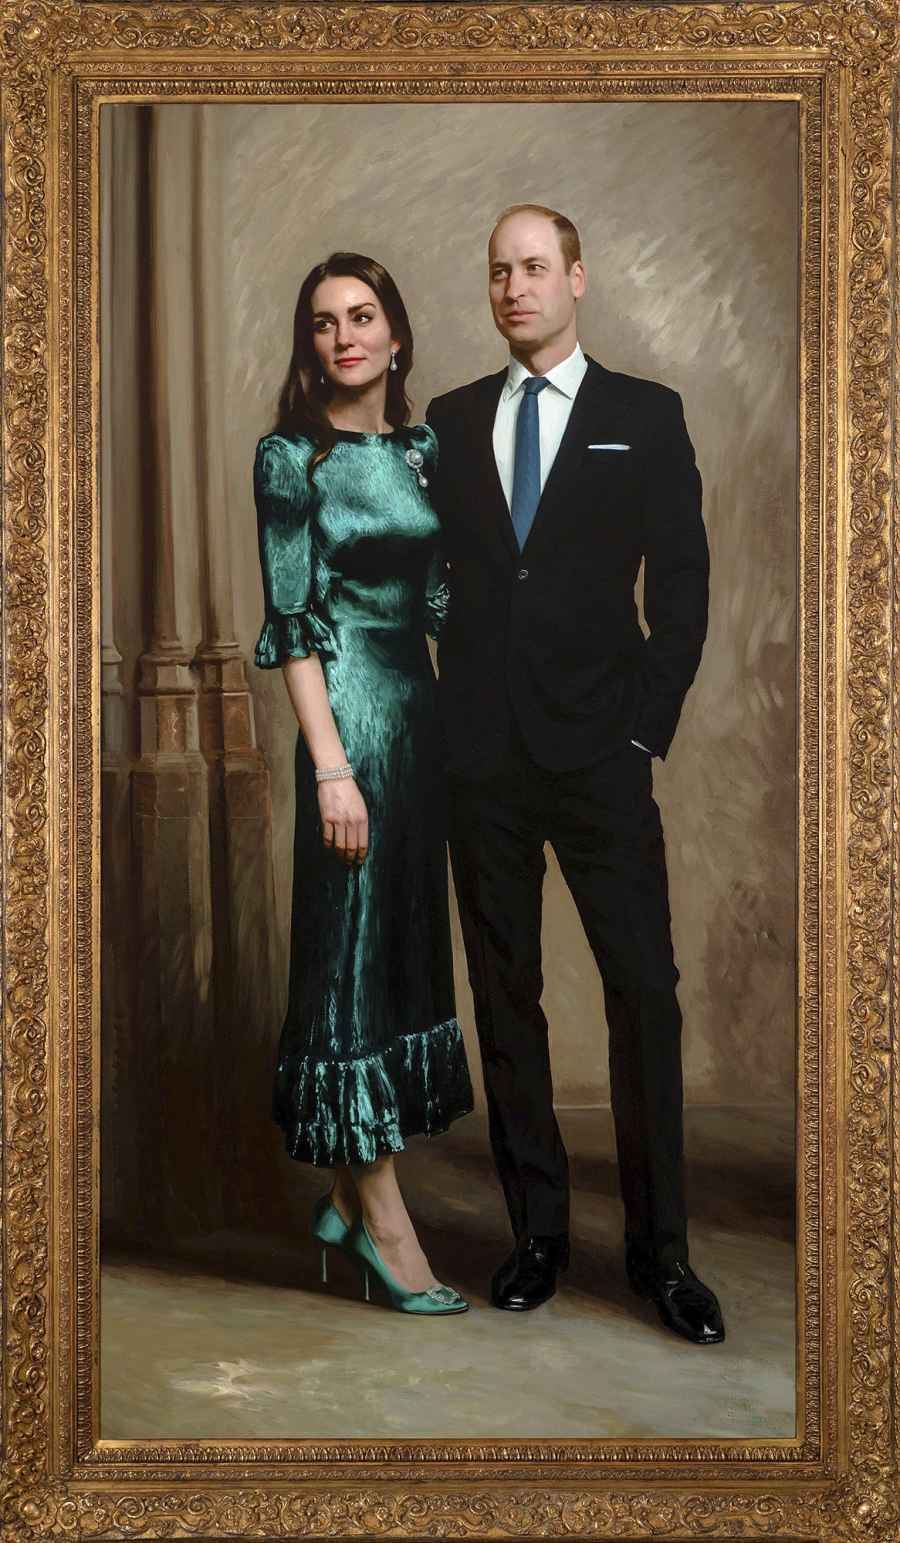 Prince William and Kate Middleton Unveil Their 1st Official Portrait Together 2